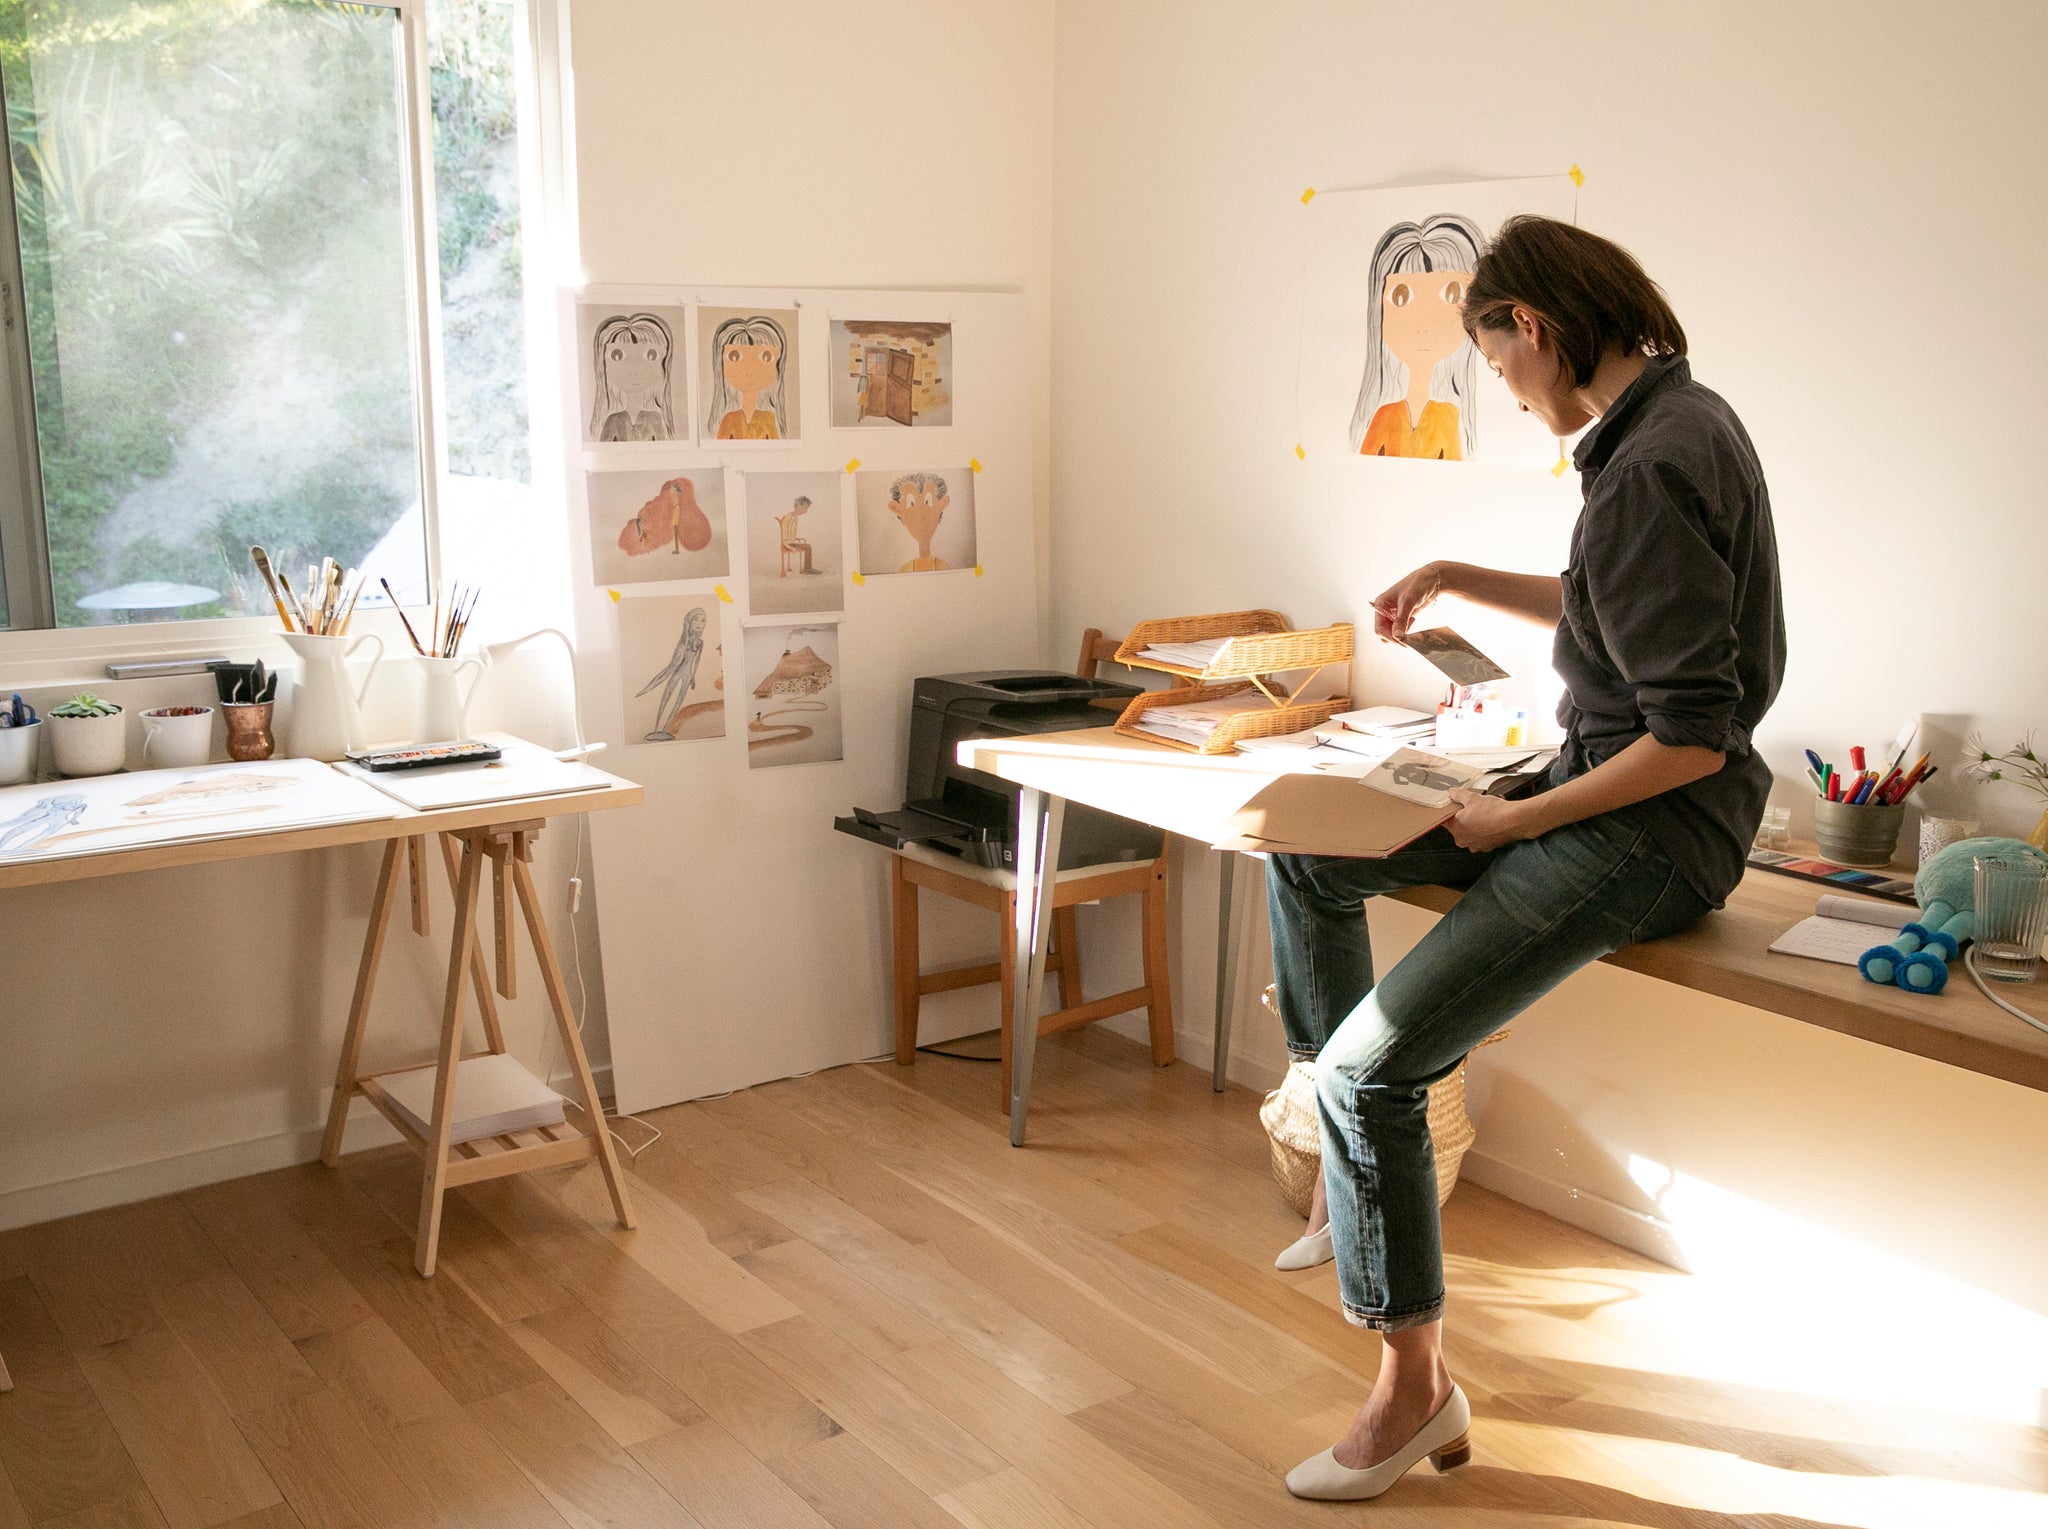 Loan Chabanol seated on one her desks looking through some artwork.